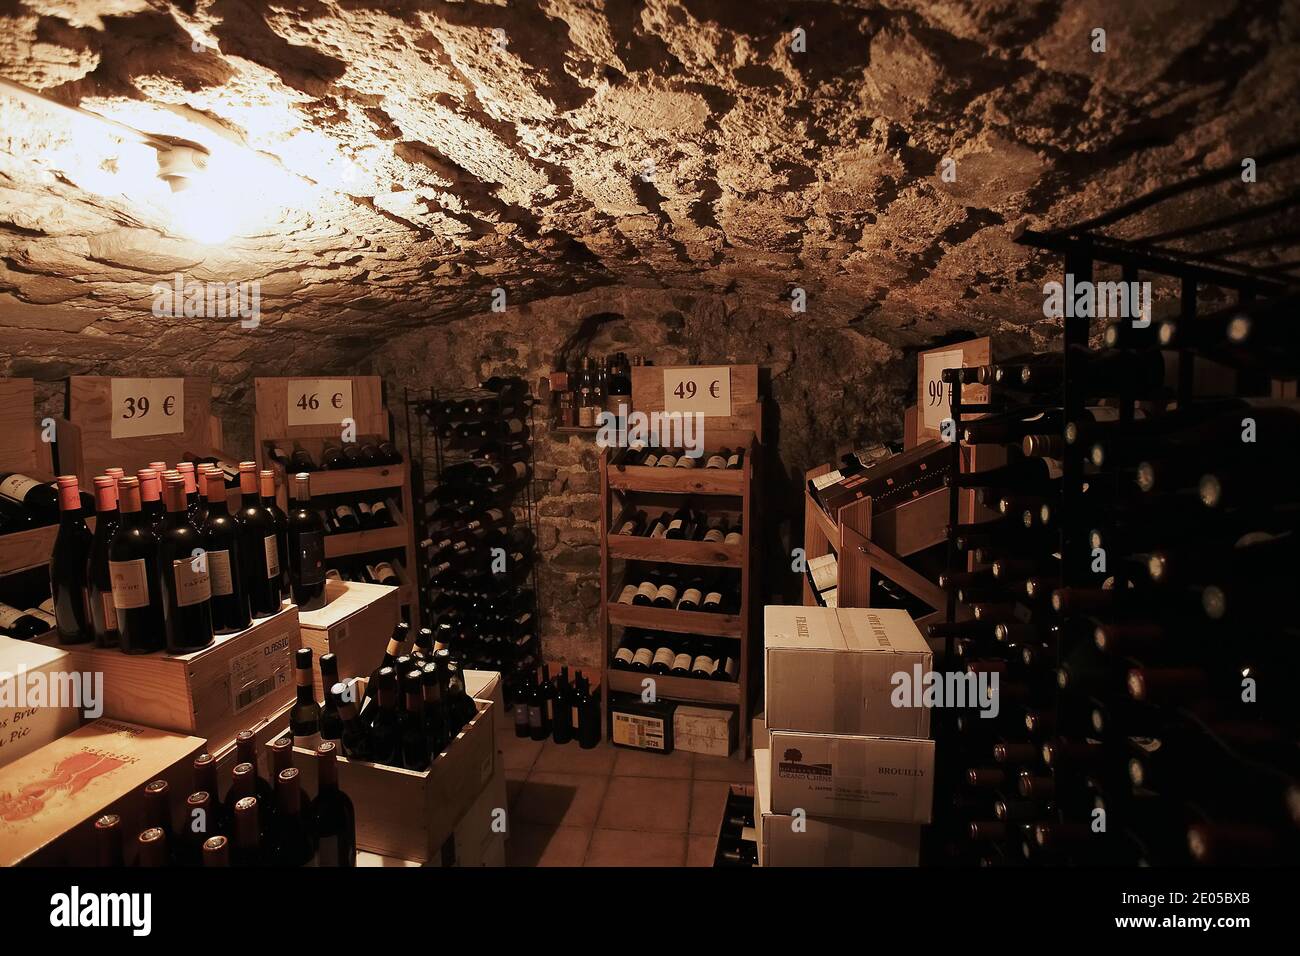 bottles of wine kept in a ancient winecellar shop in Paris,France Stock Photo